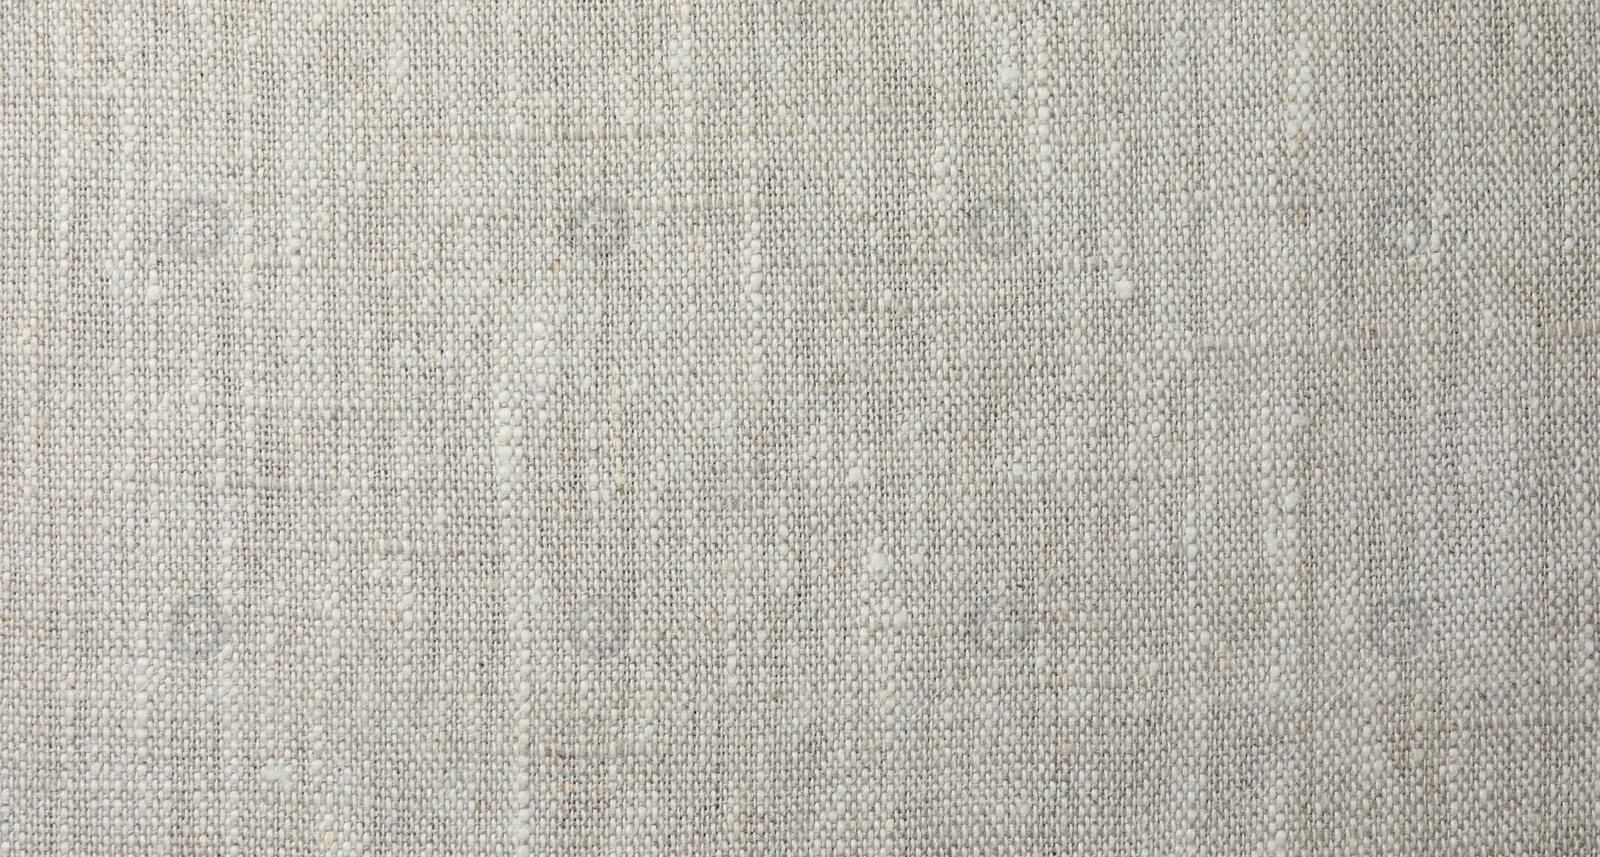 Photo of Texture of light grey fabric as background, top view